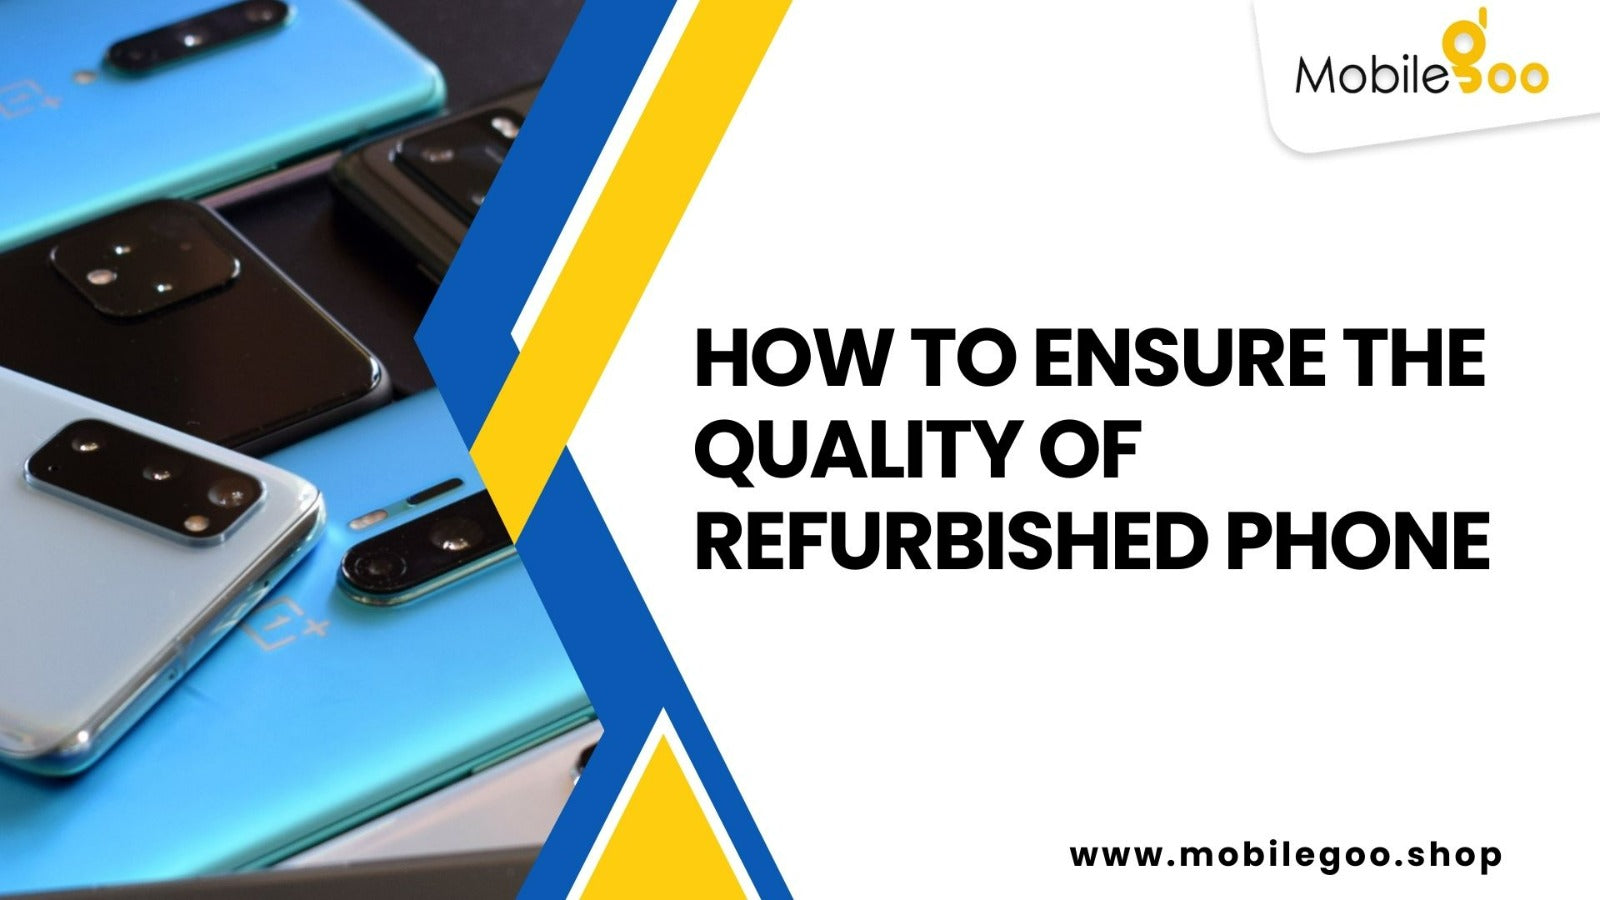 How to ensure the quality of refurbished phone